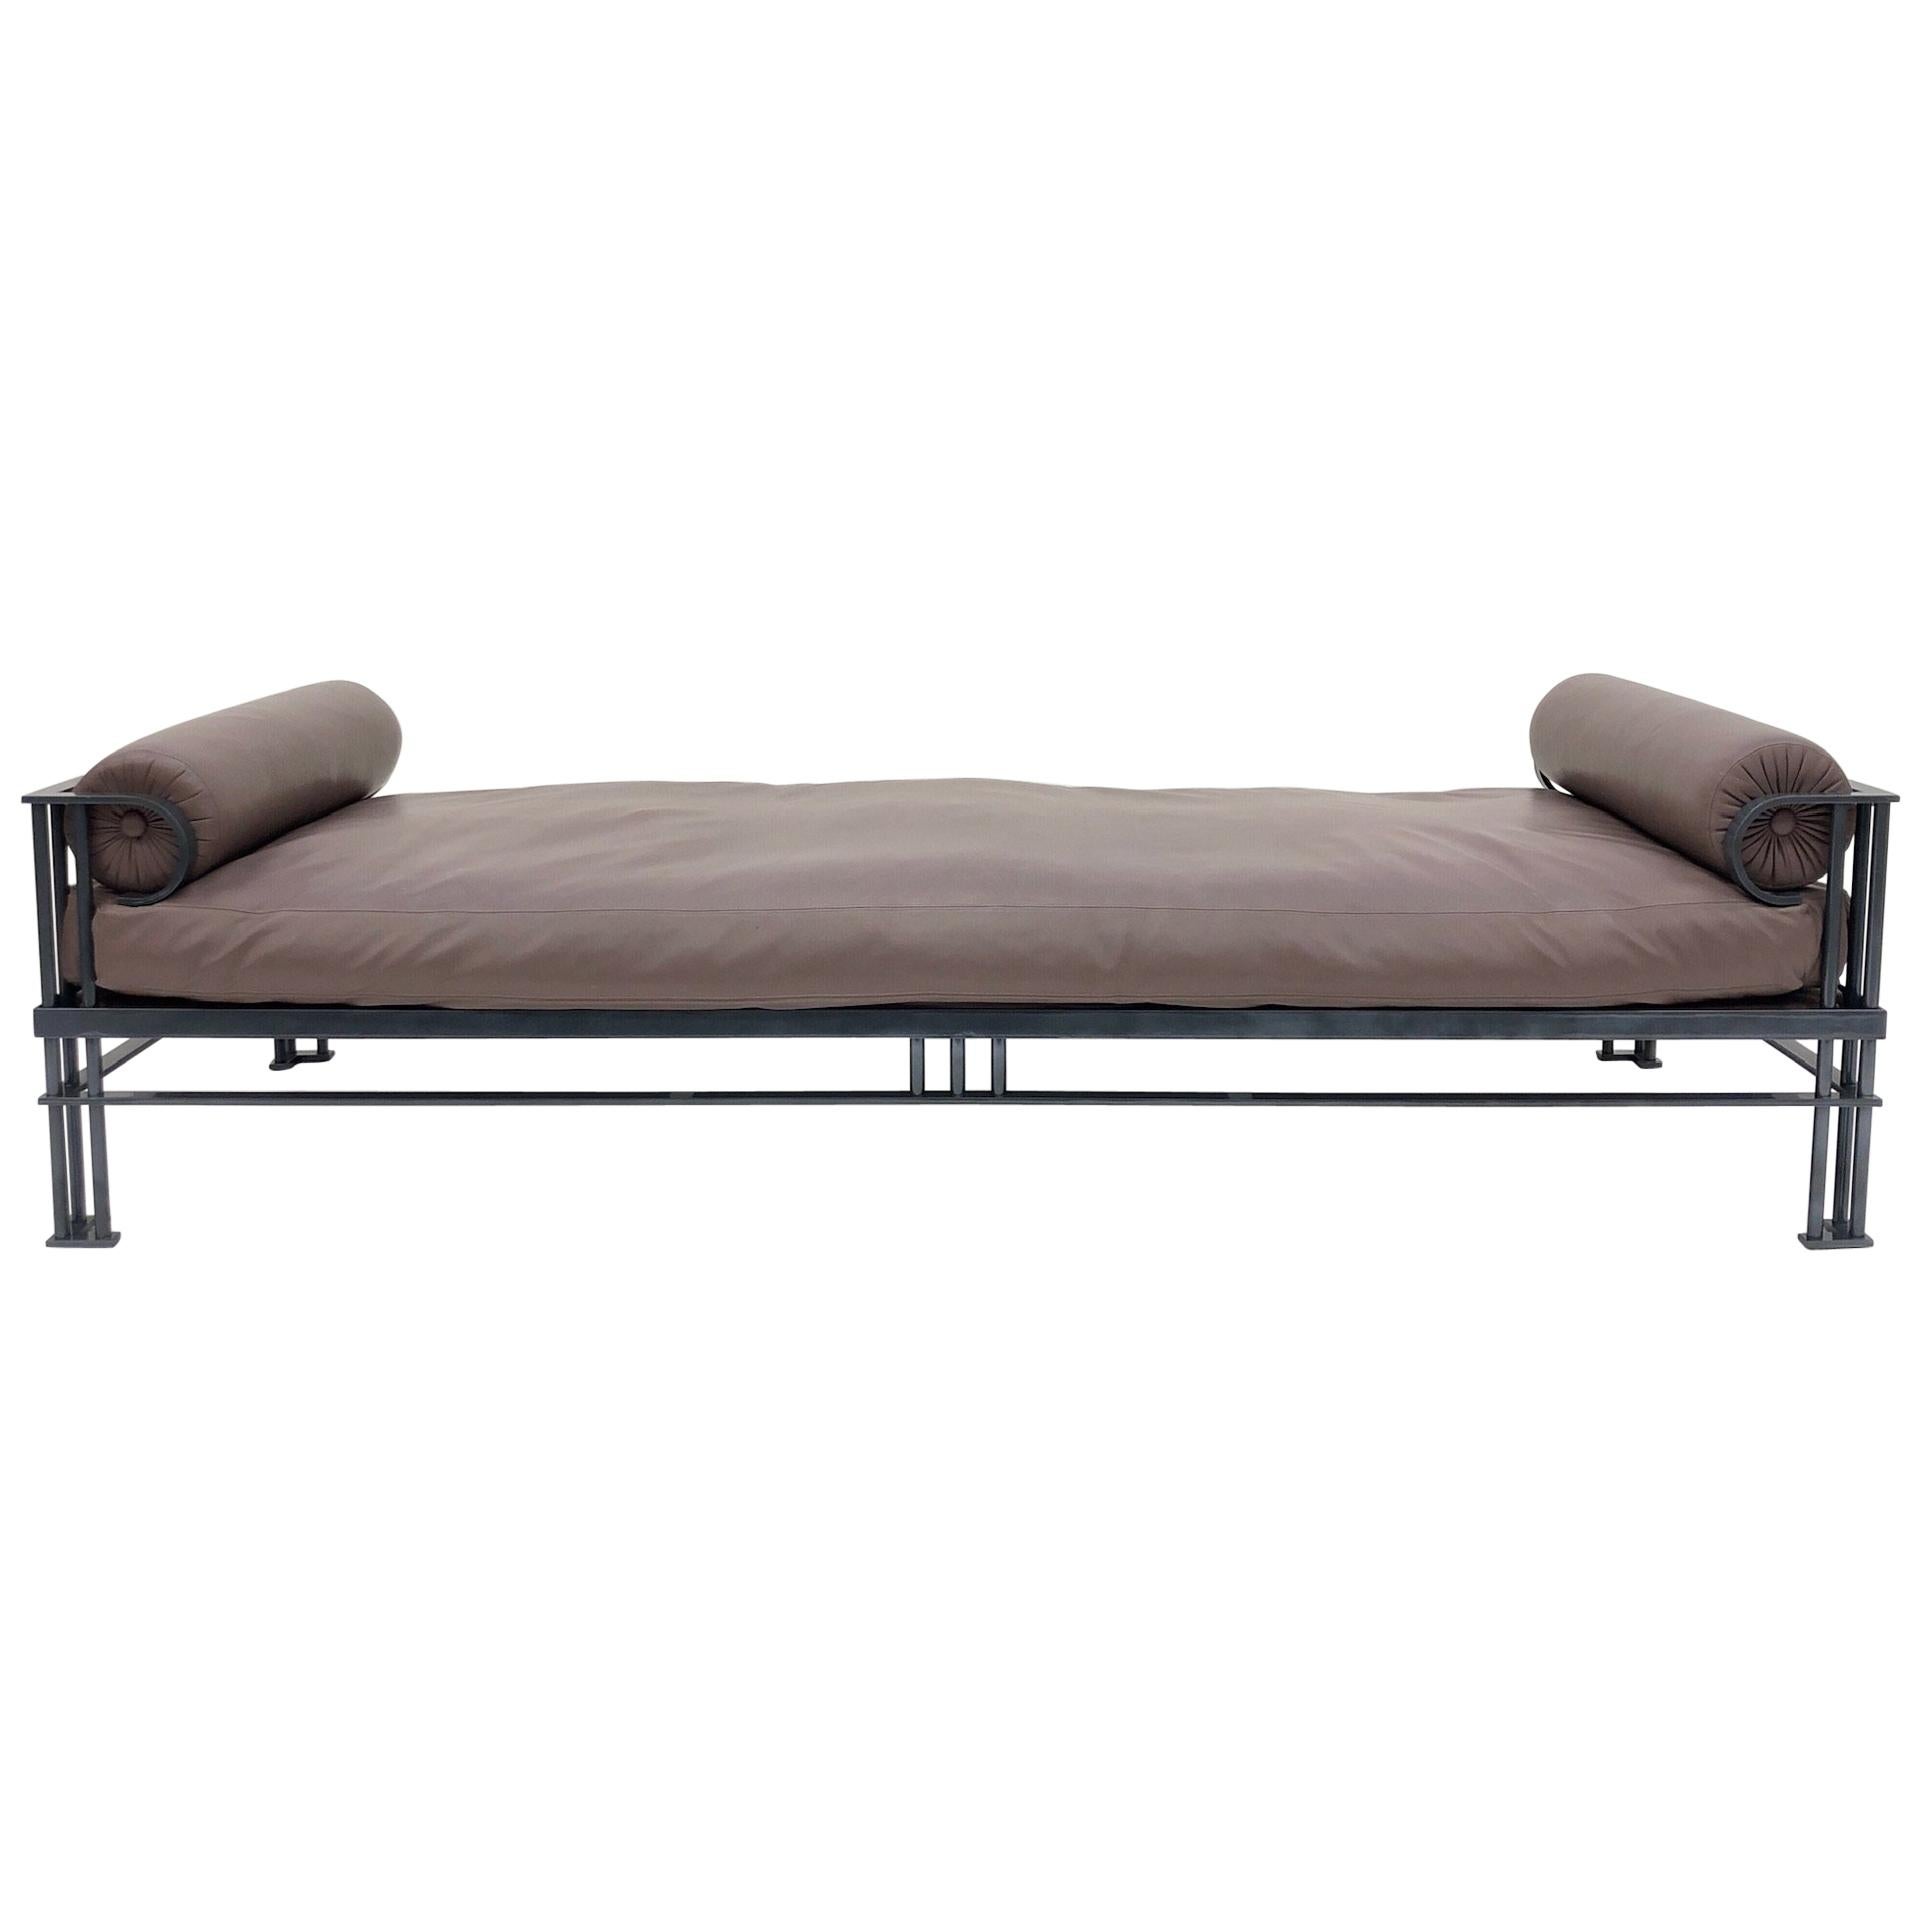 Mauve Leather and Charcoal Gray Daybed by Mirak for Steve Chase